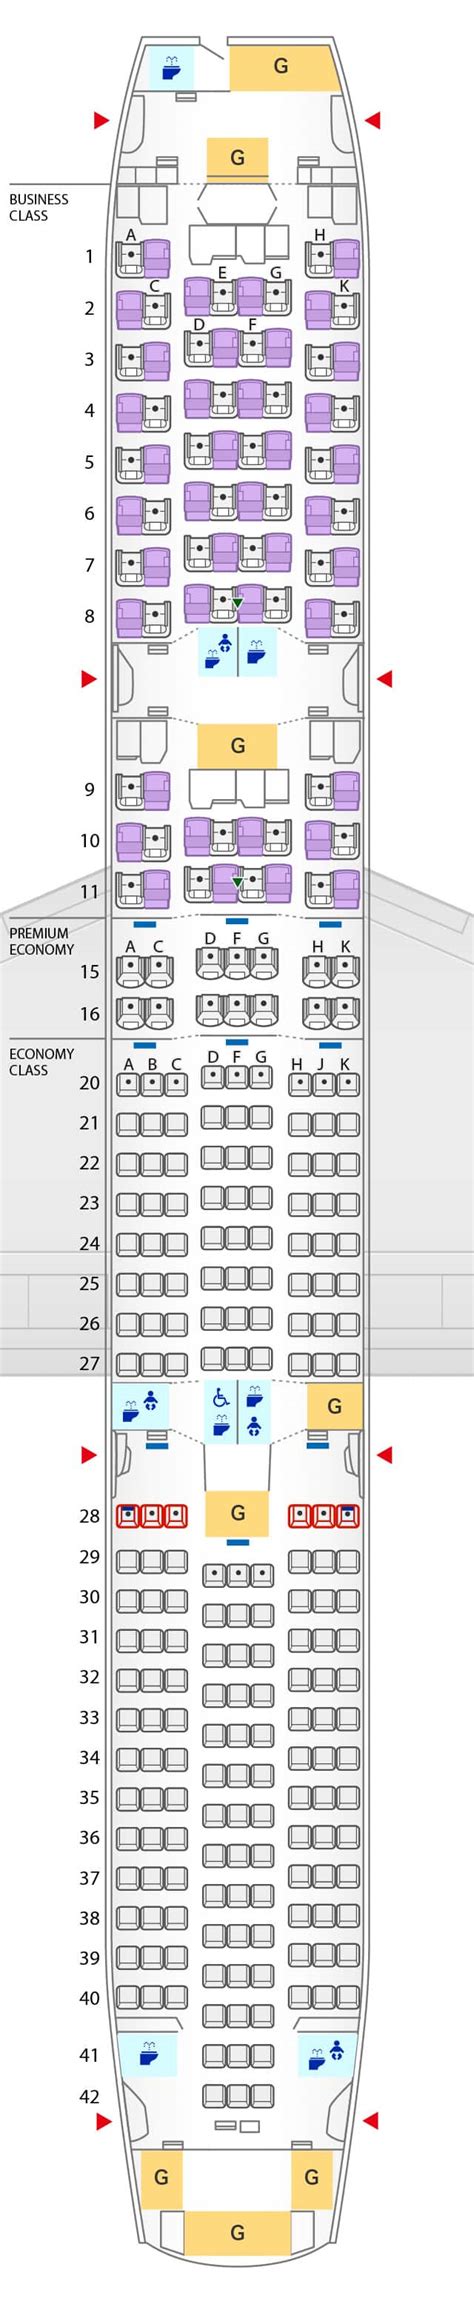 The Virgin Atlantic Boeing 787-9 aircraft features a three class configuration with 31 lie-flat bed Upper Class seats, 35 Premium Economy seats, and 198 standard Economy class …. 